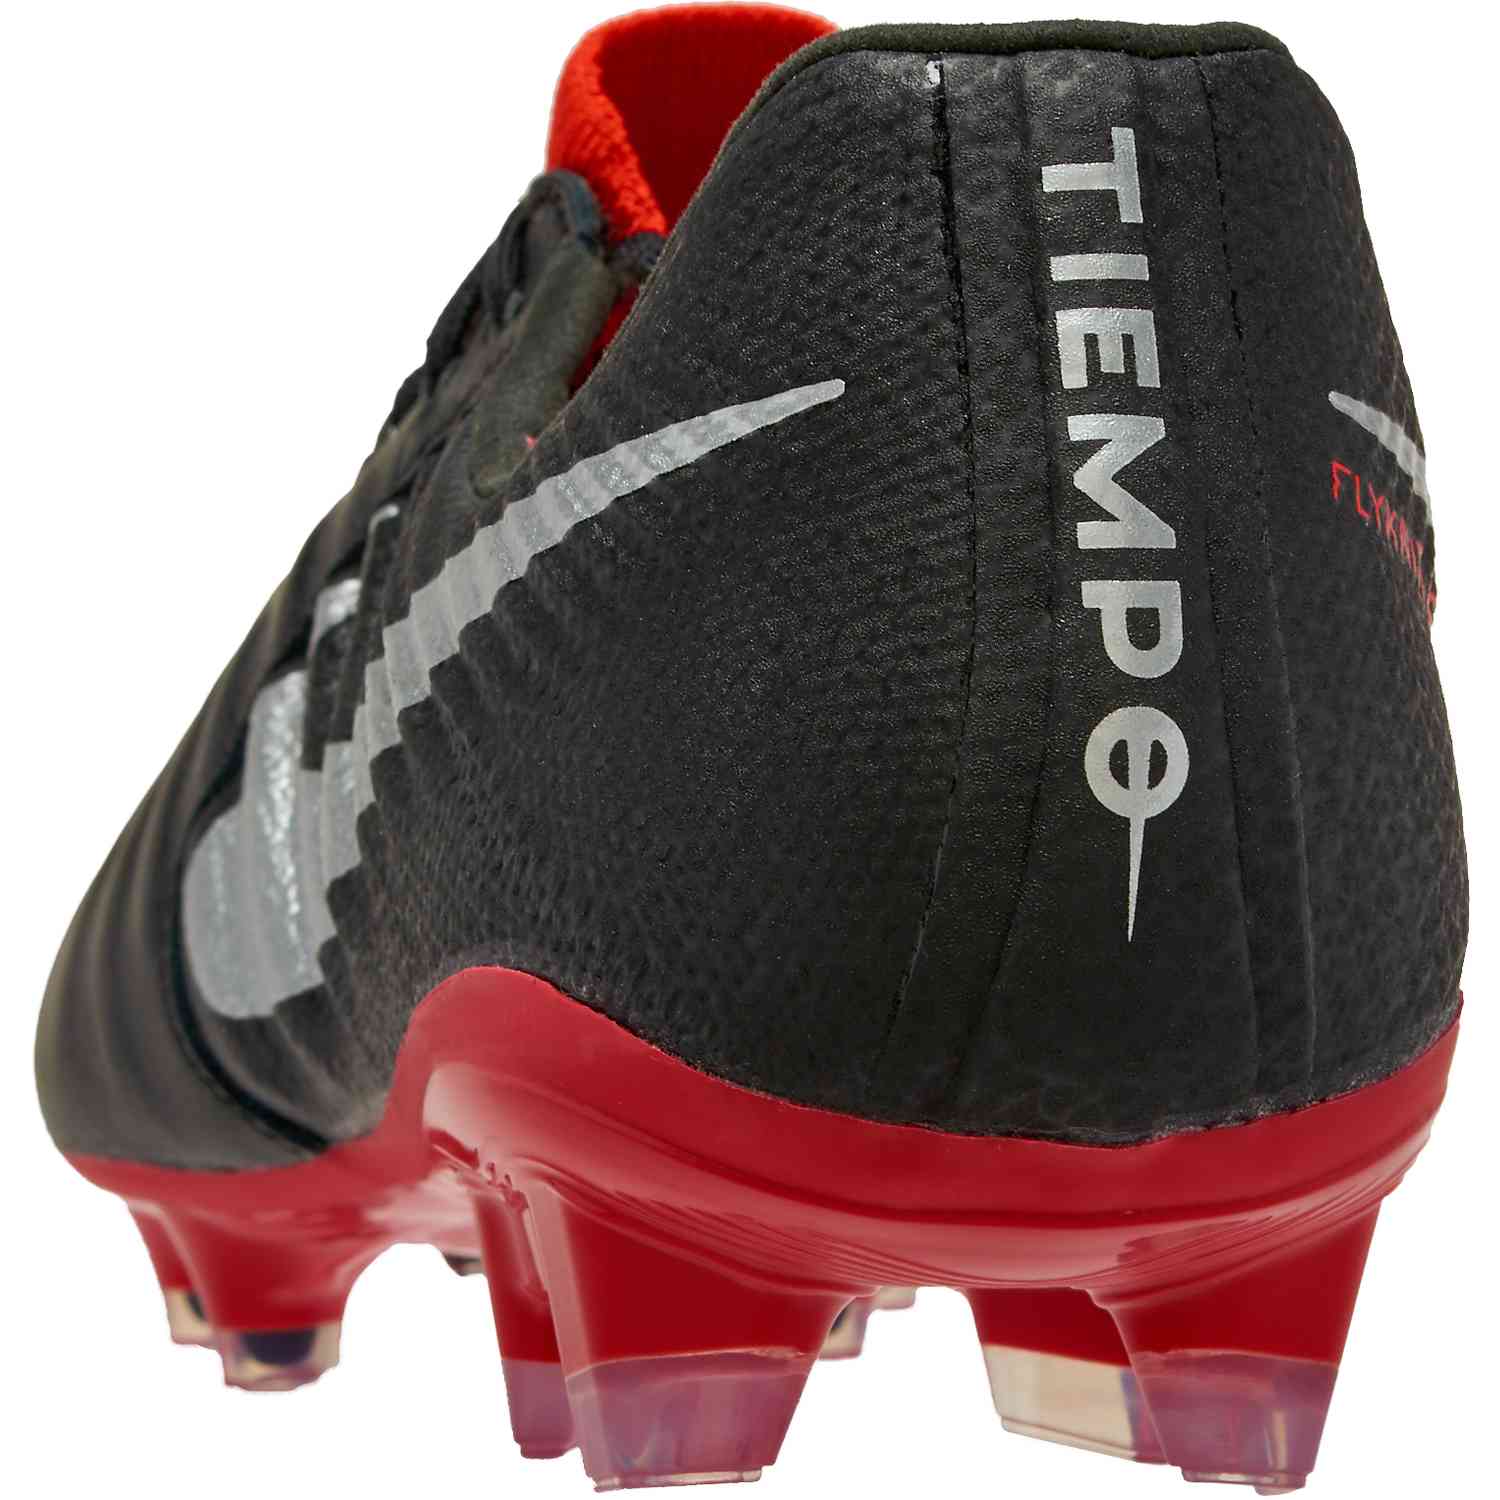 nike tiempo legend 7 red and black